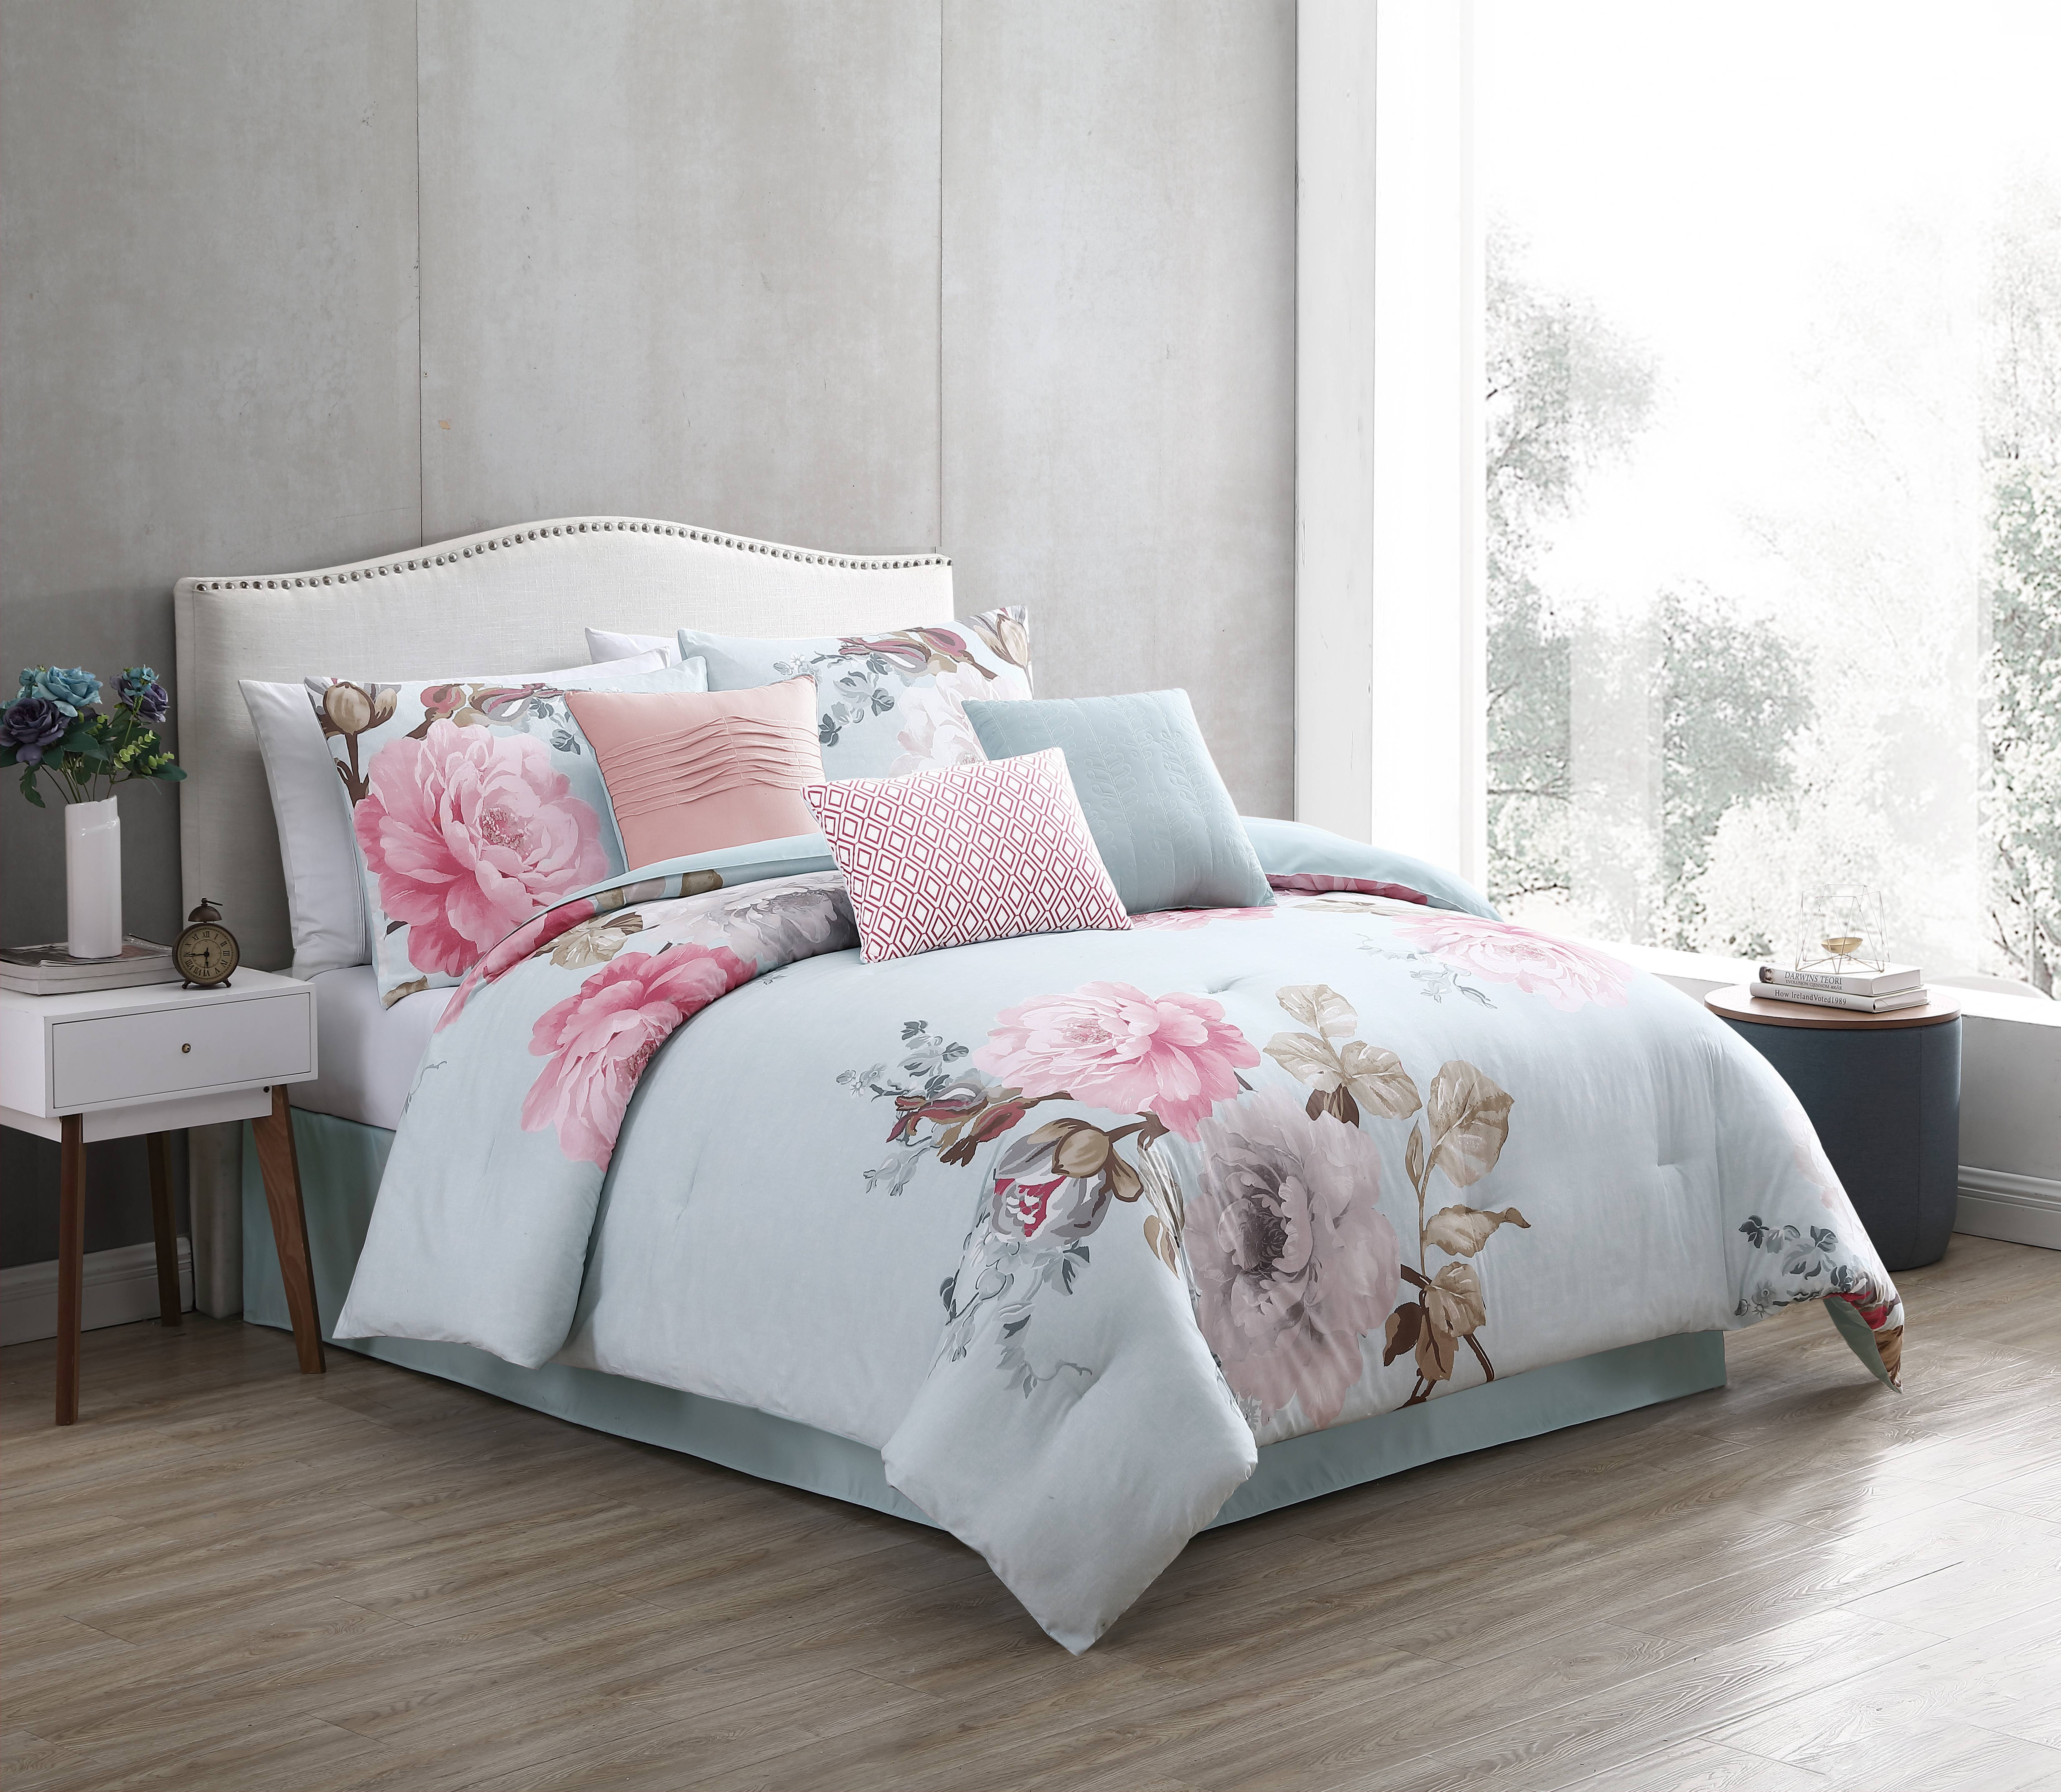 Riverbrook Home Ridgely Blush/Spa Printed Floral 7 pc Queen Comforter ...